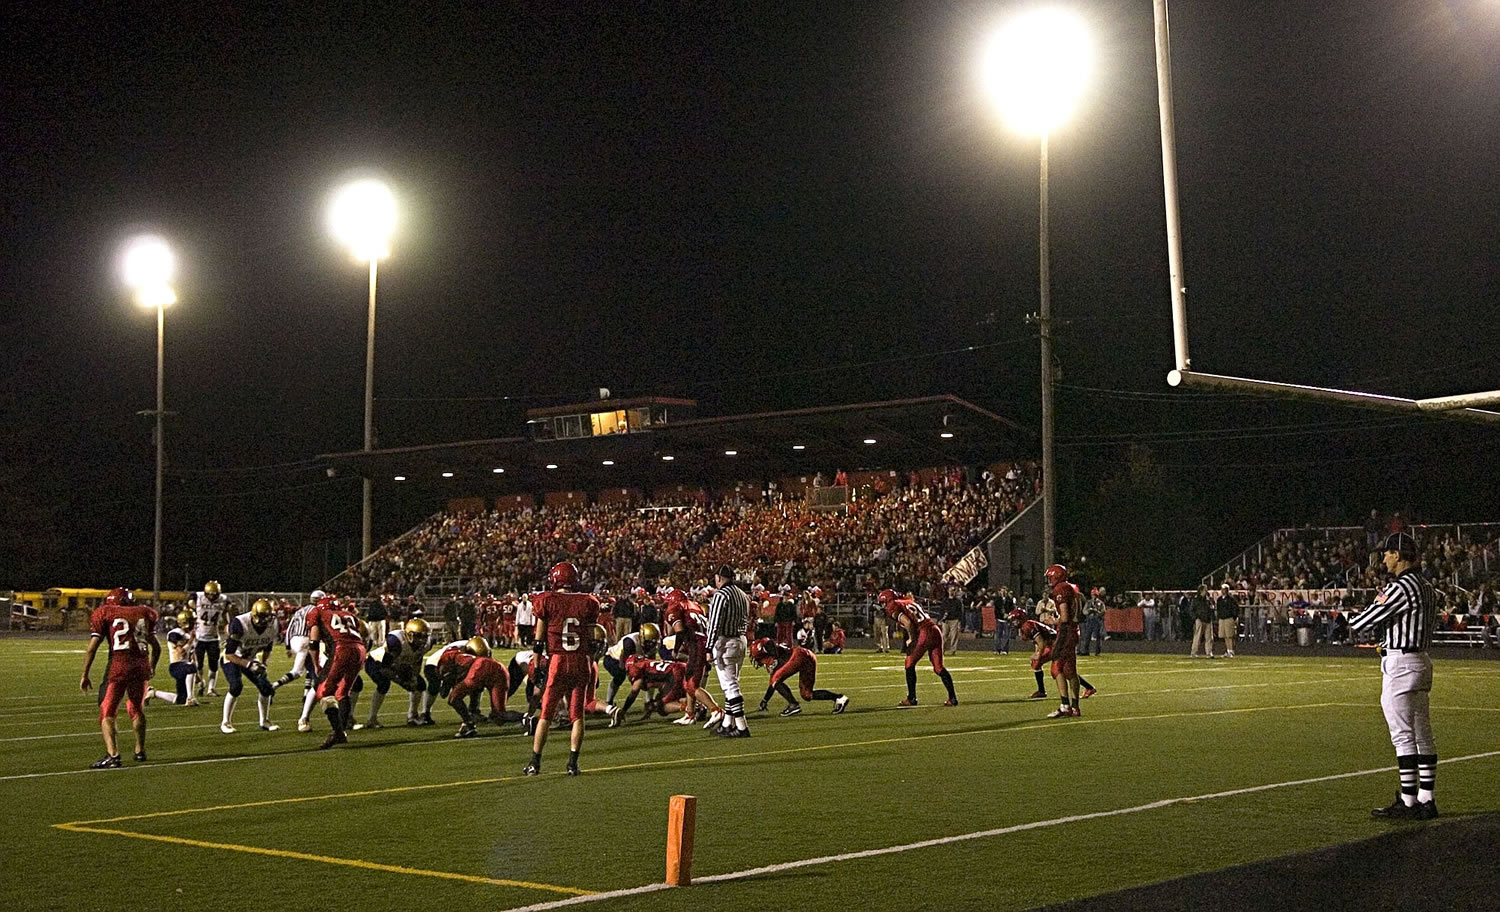 Columbian file photo
Renovations planned for Doc Harris Stadium in Camas will expand the capacity from its current 1,650 to more than 3,600, including almost 2,900 on the home side.